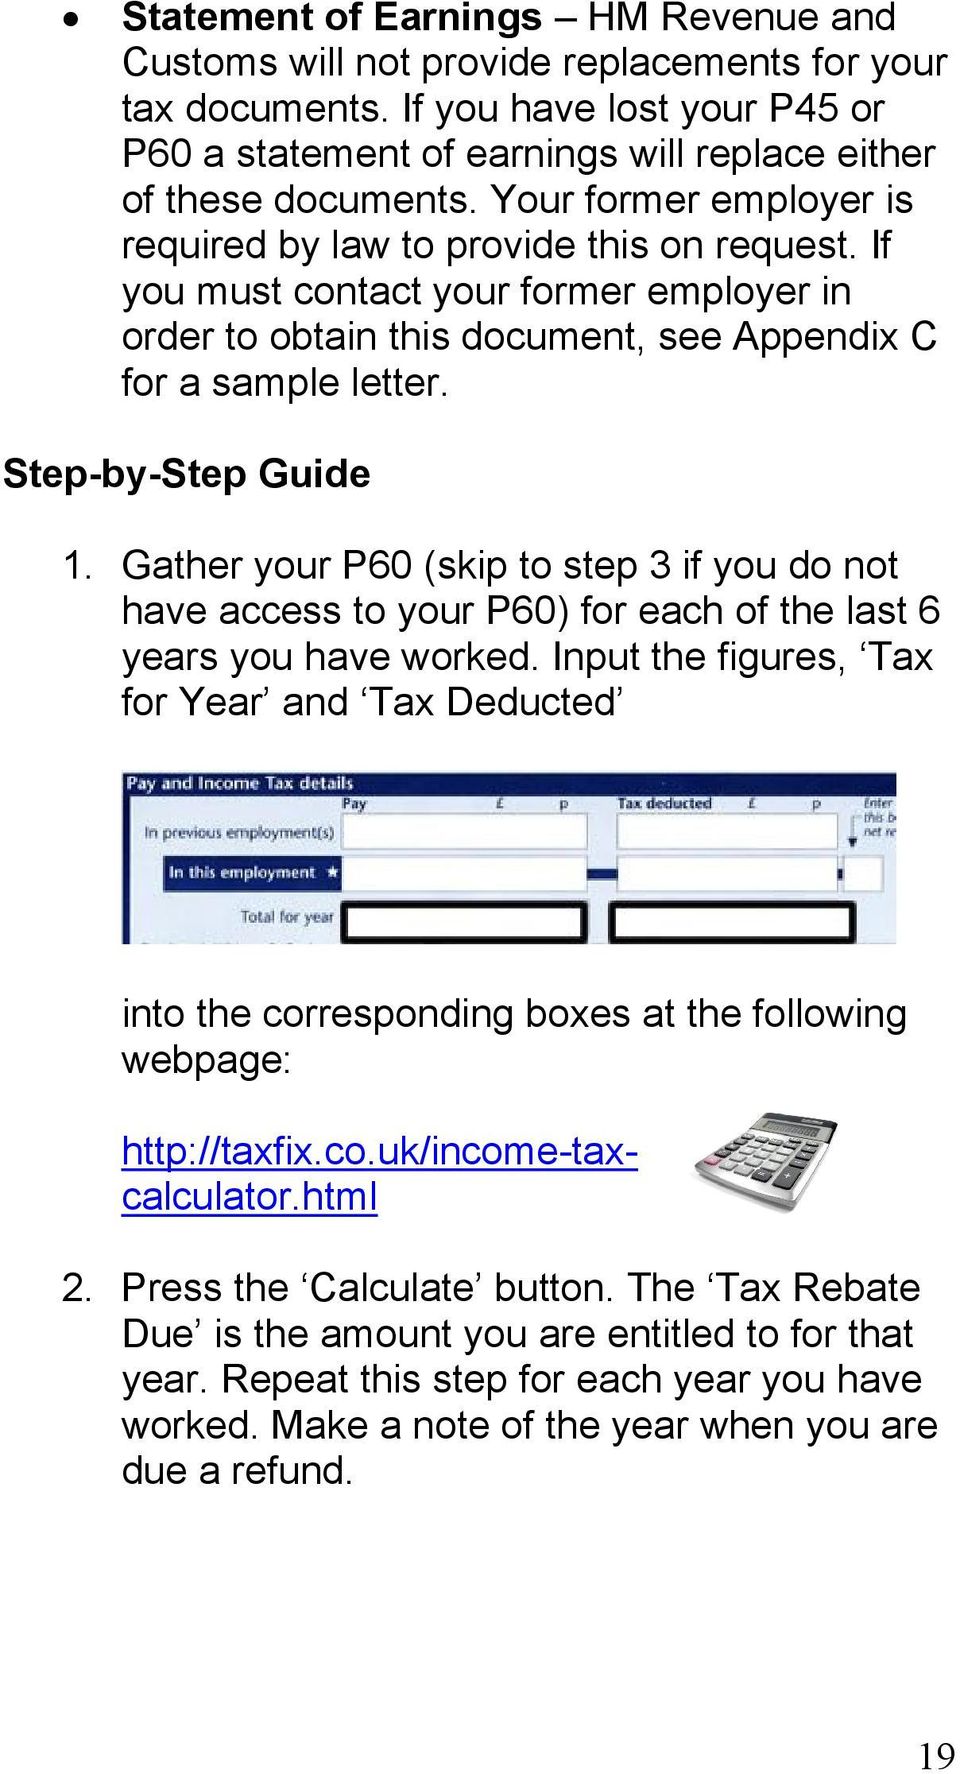 Gather your P60 (skip to step 3 if you do not have access to your P60) for each of the last 6 years you have worked.